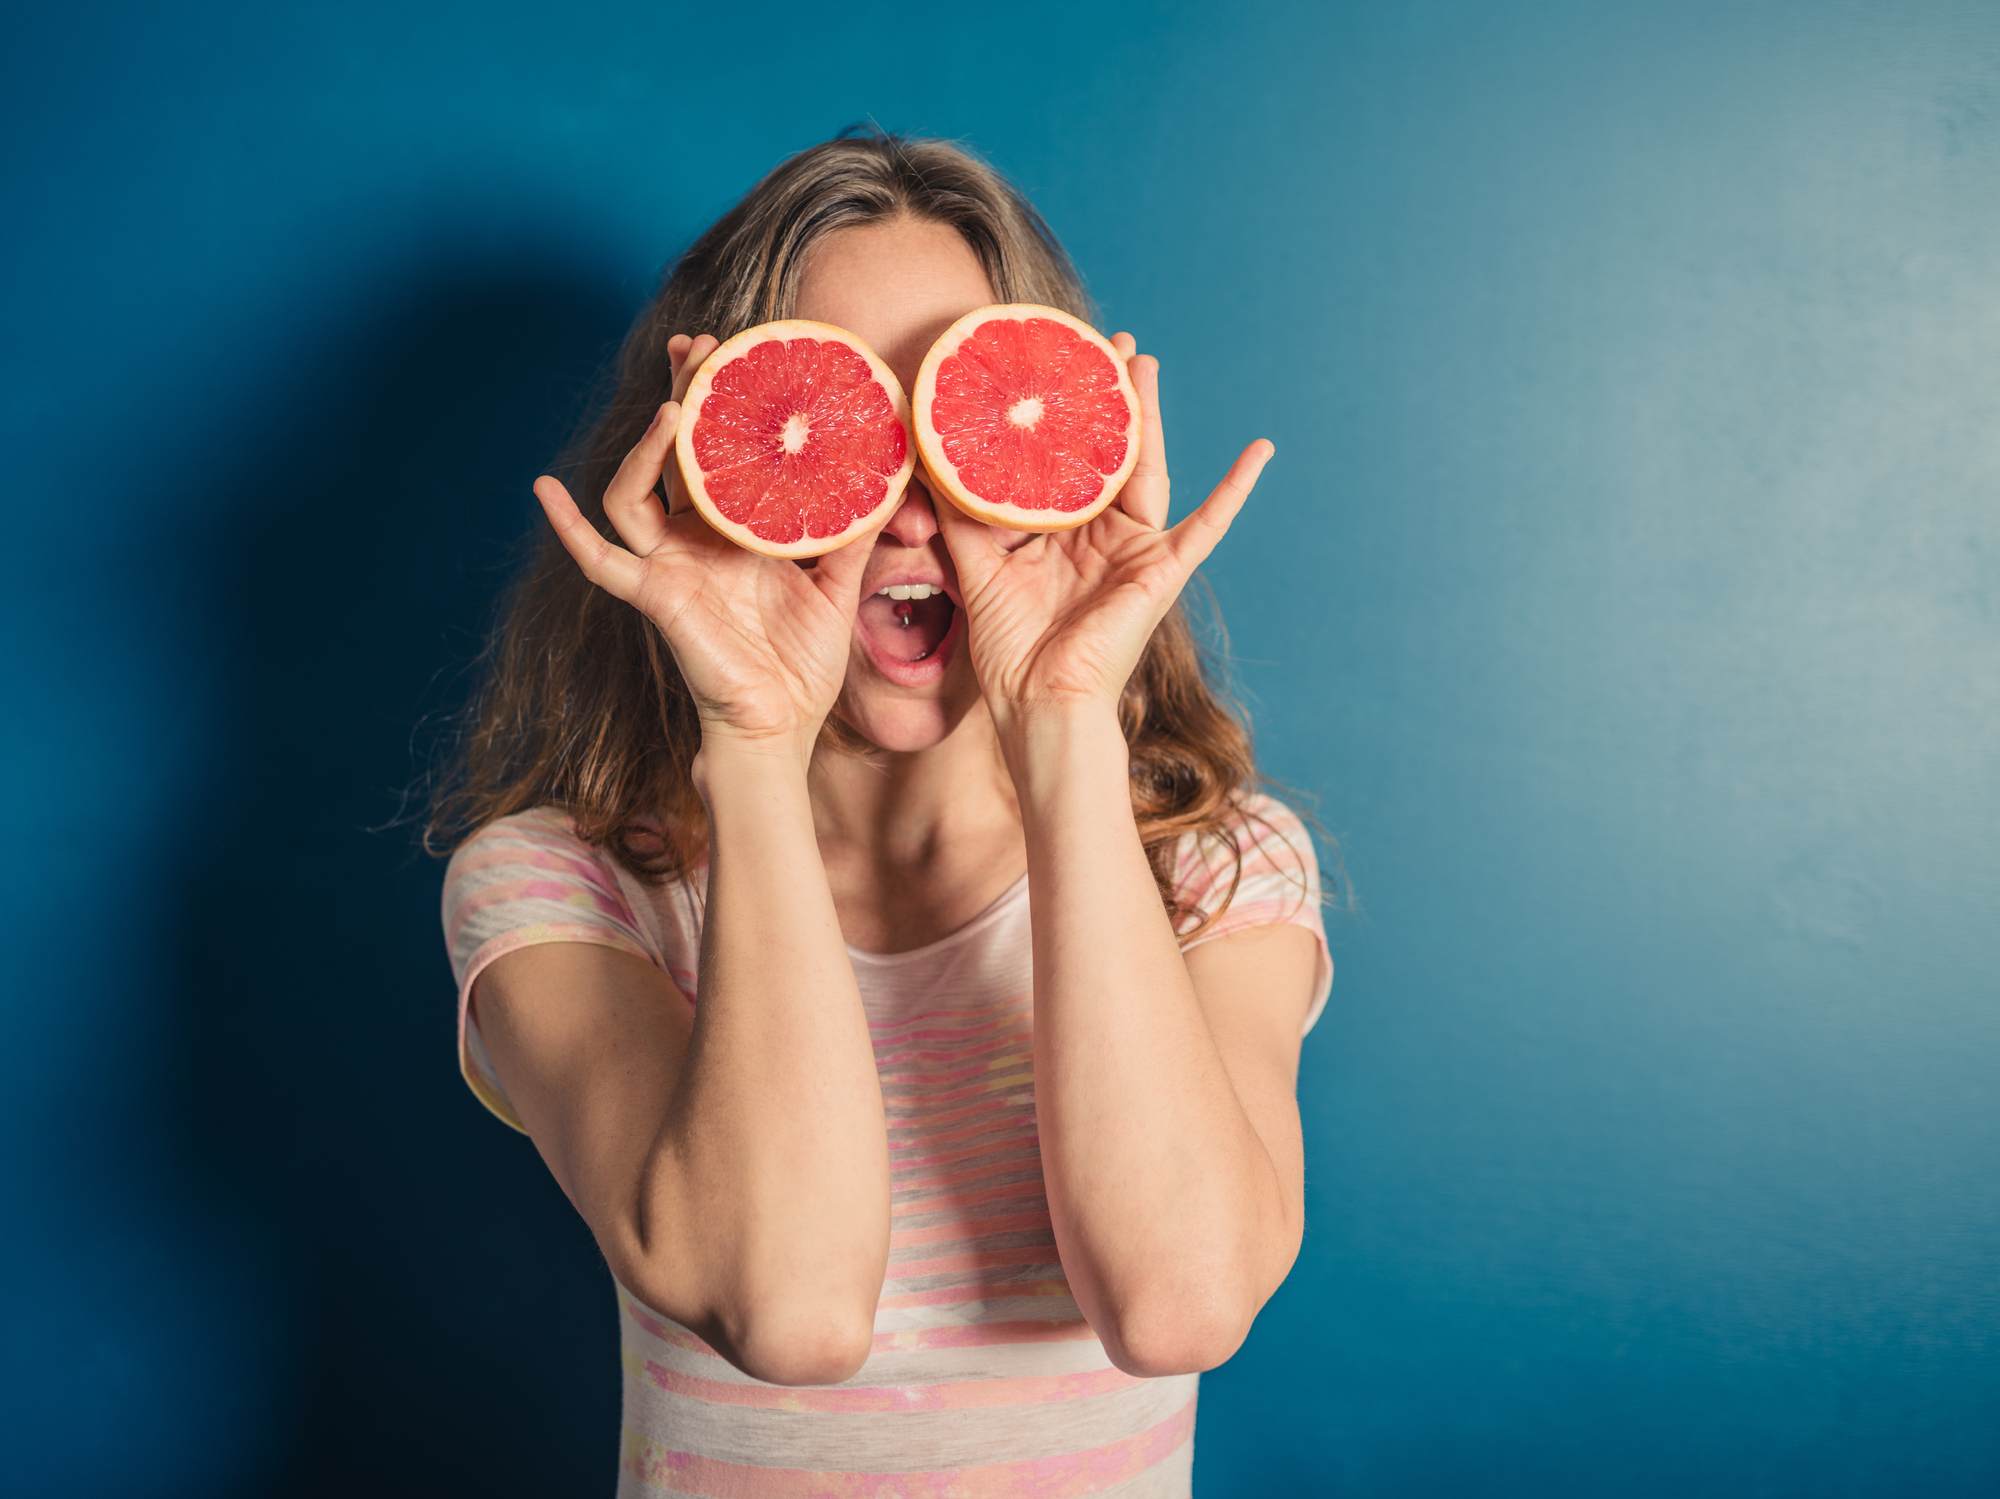 A young woman is using two halves of a grapefruit as binoculars